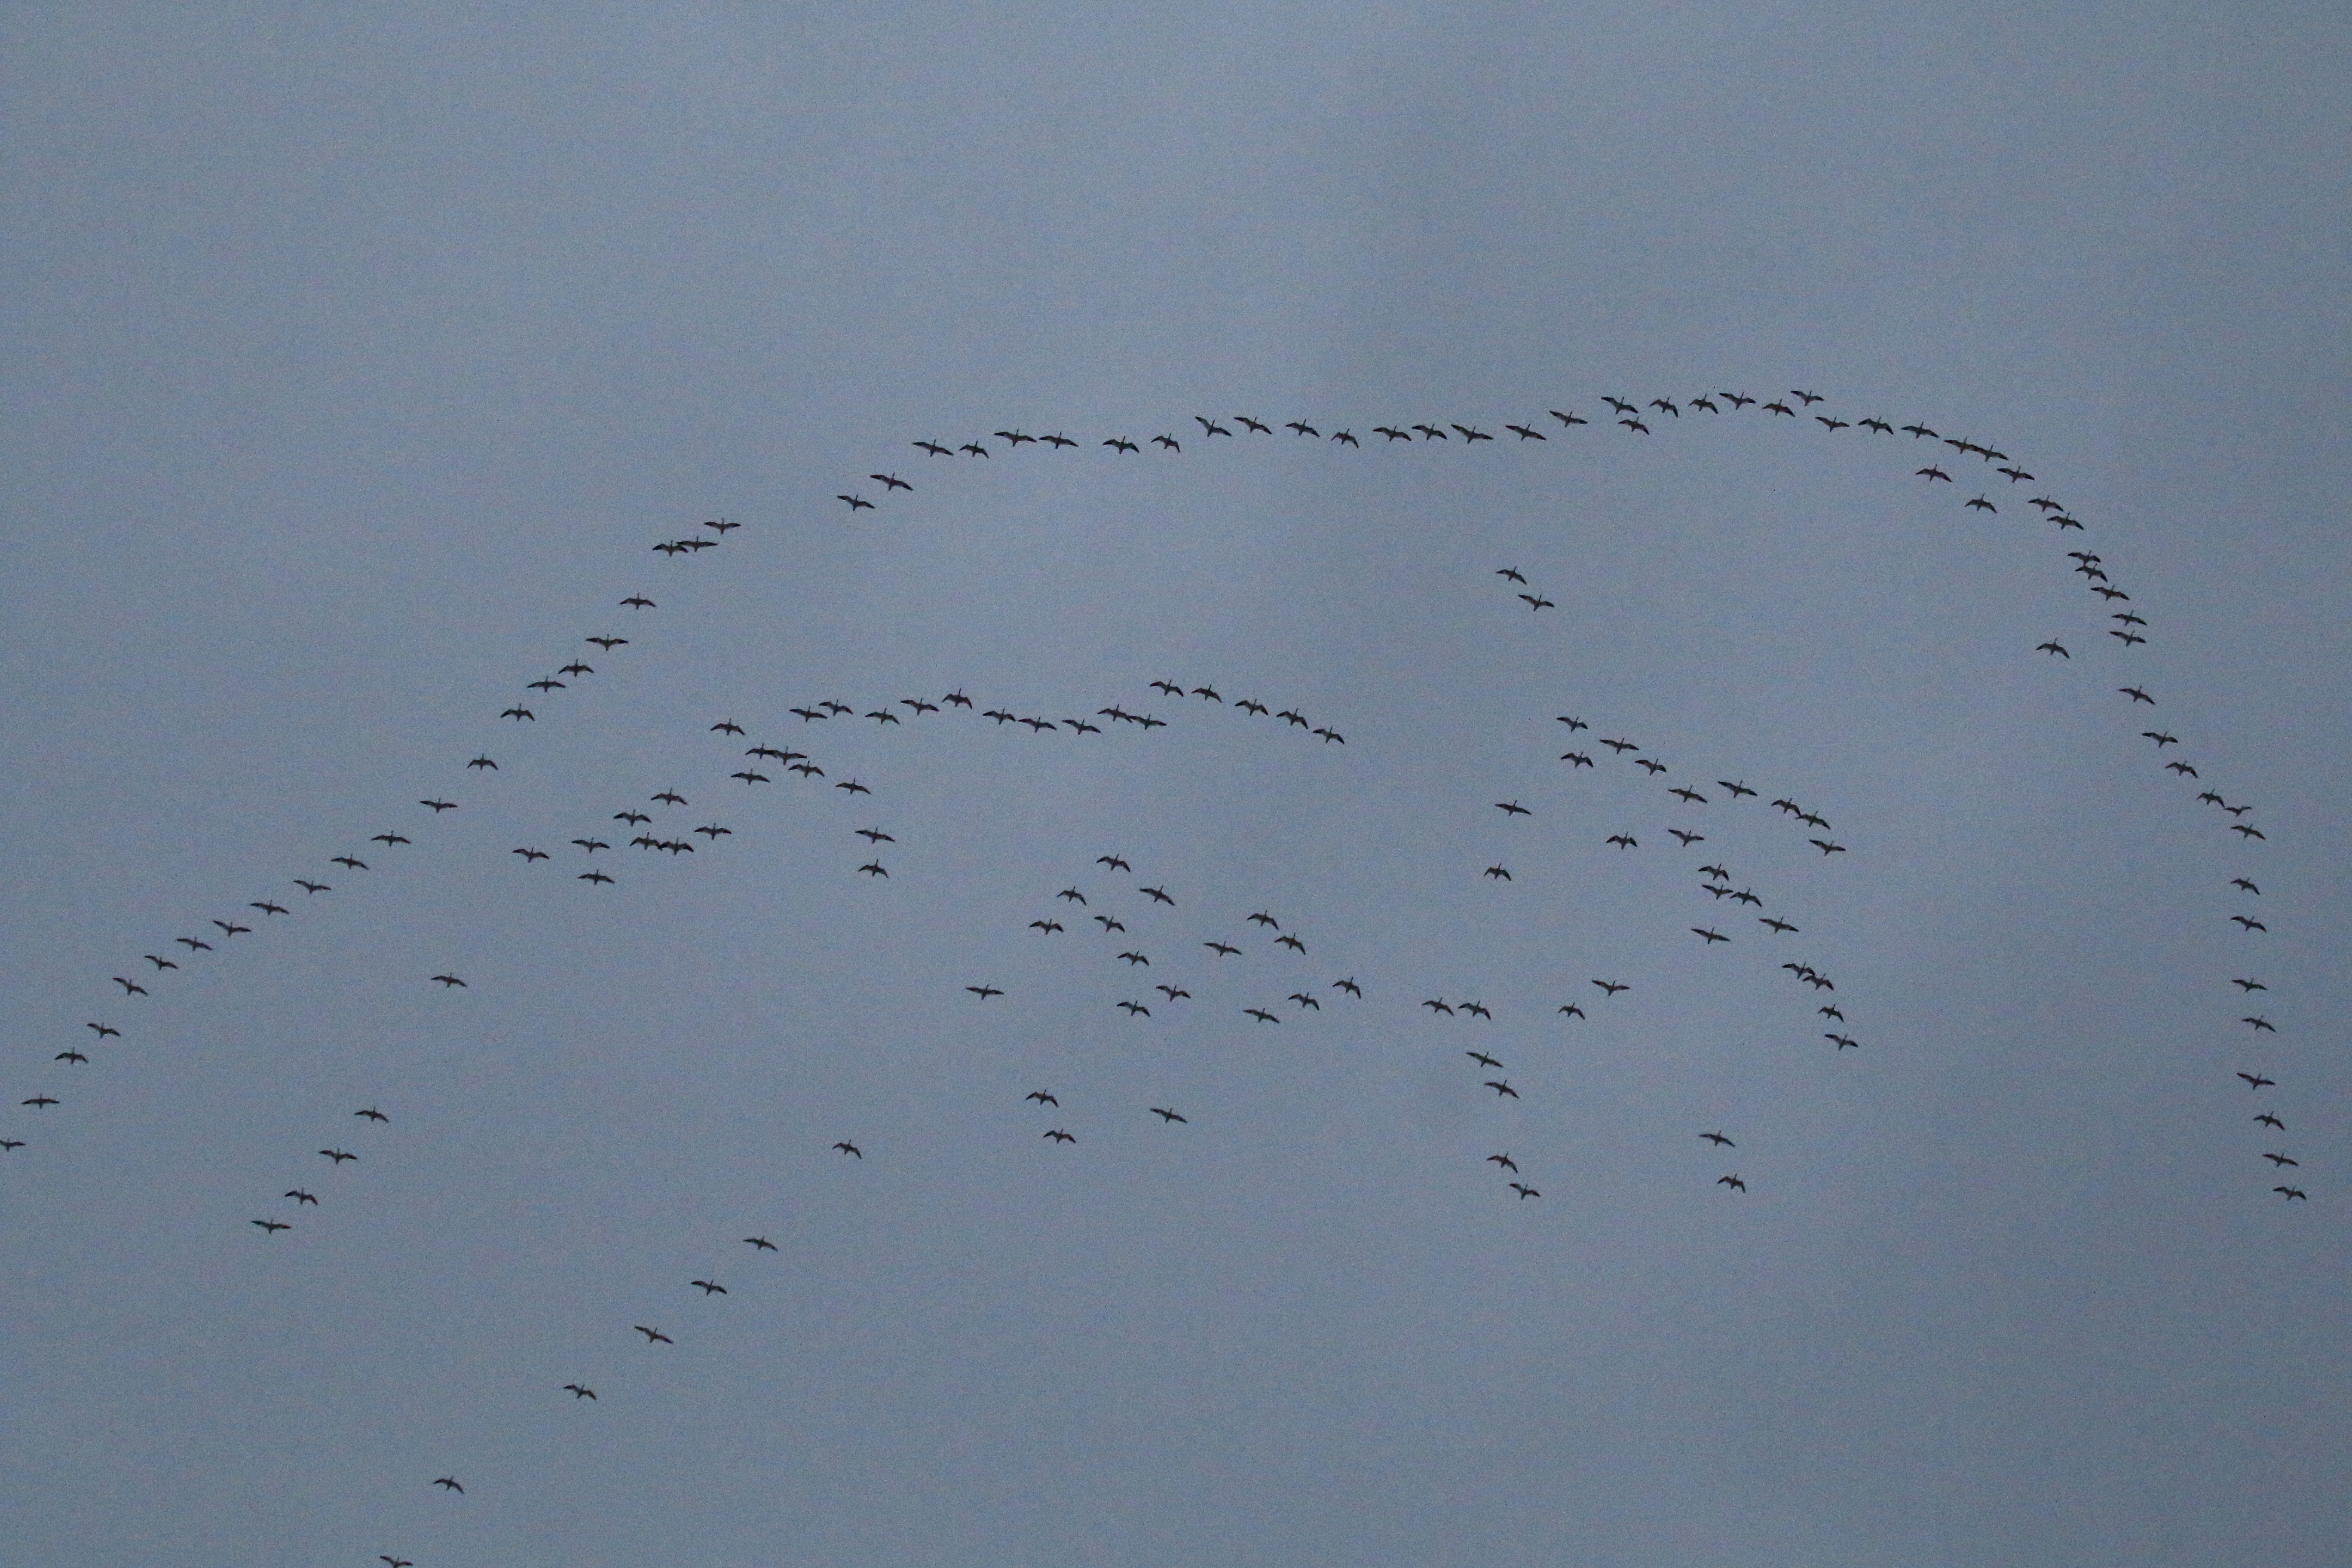 A large skein of Snow Geese flies over the Black Dirt Region, Orange County NY, 12/12/14. 